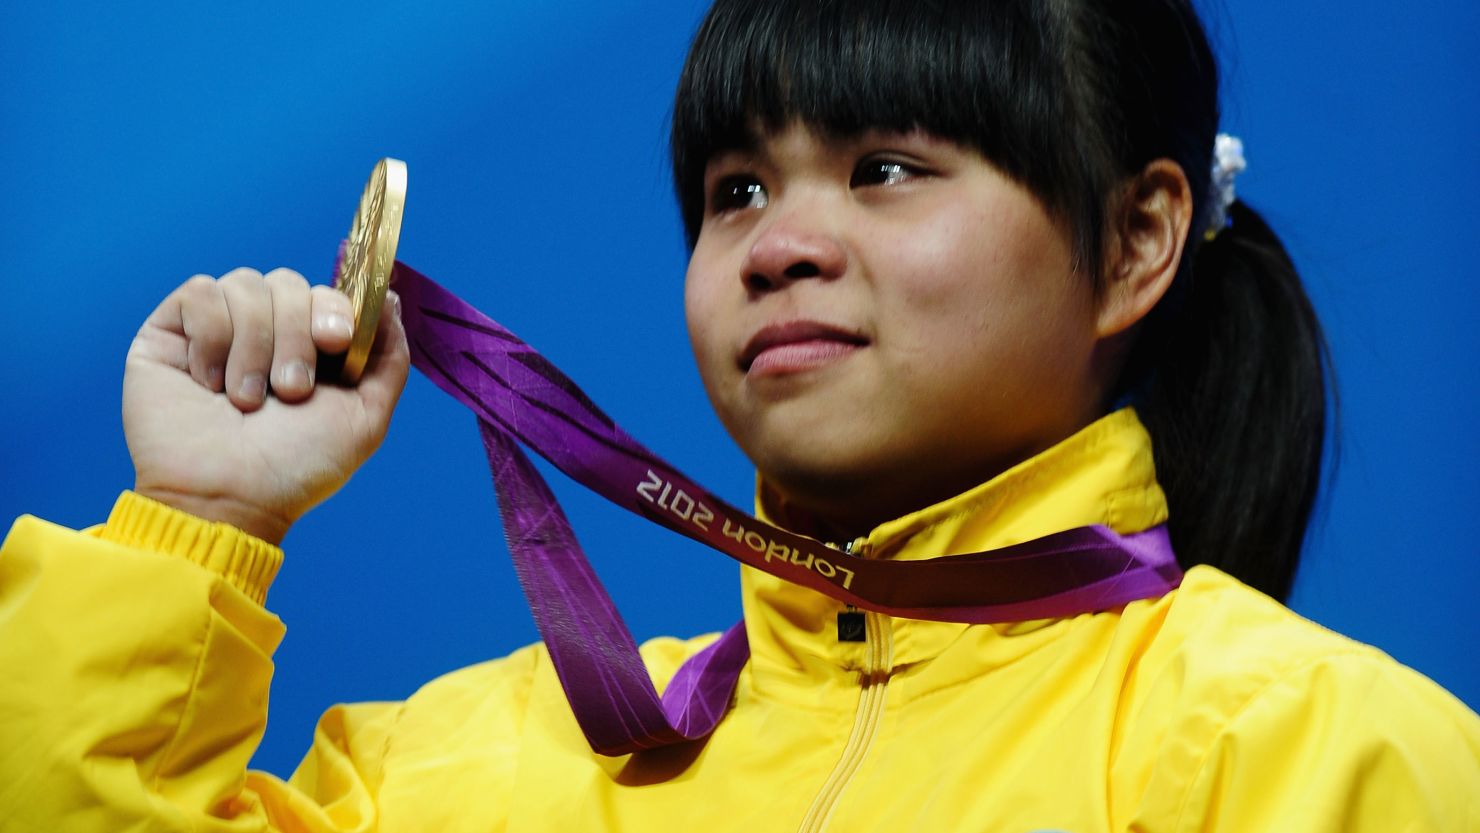 Zulfiya Chinshanlo of Kazakhstan stands with her gold medal on the podium after the Women's 53kg Weightlifting event.